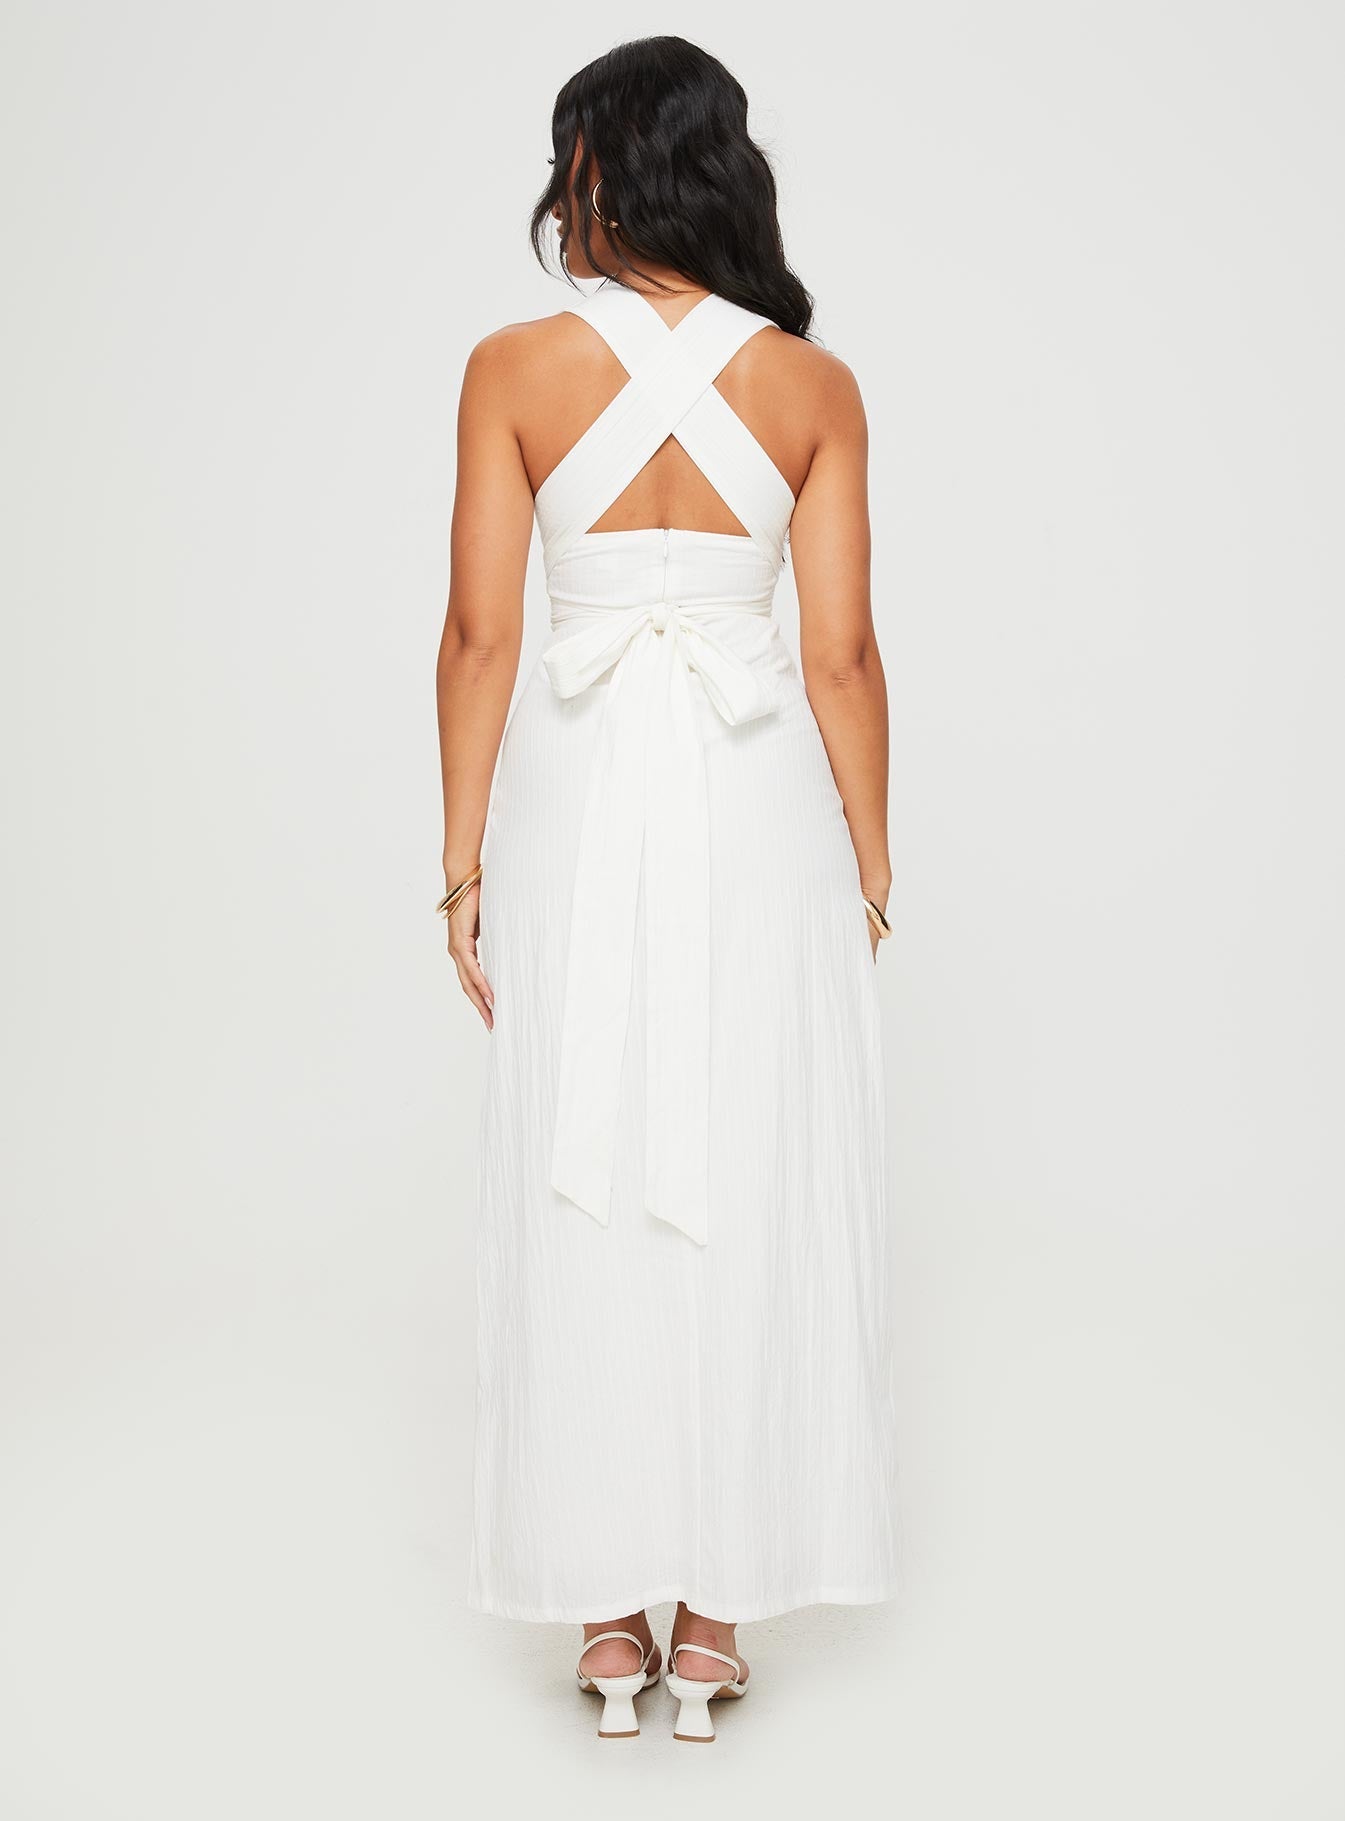 Shop Formal Dress - Alsace Maxi Dress White featured image